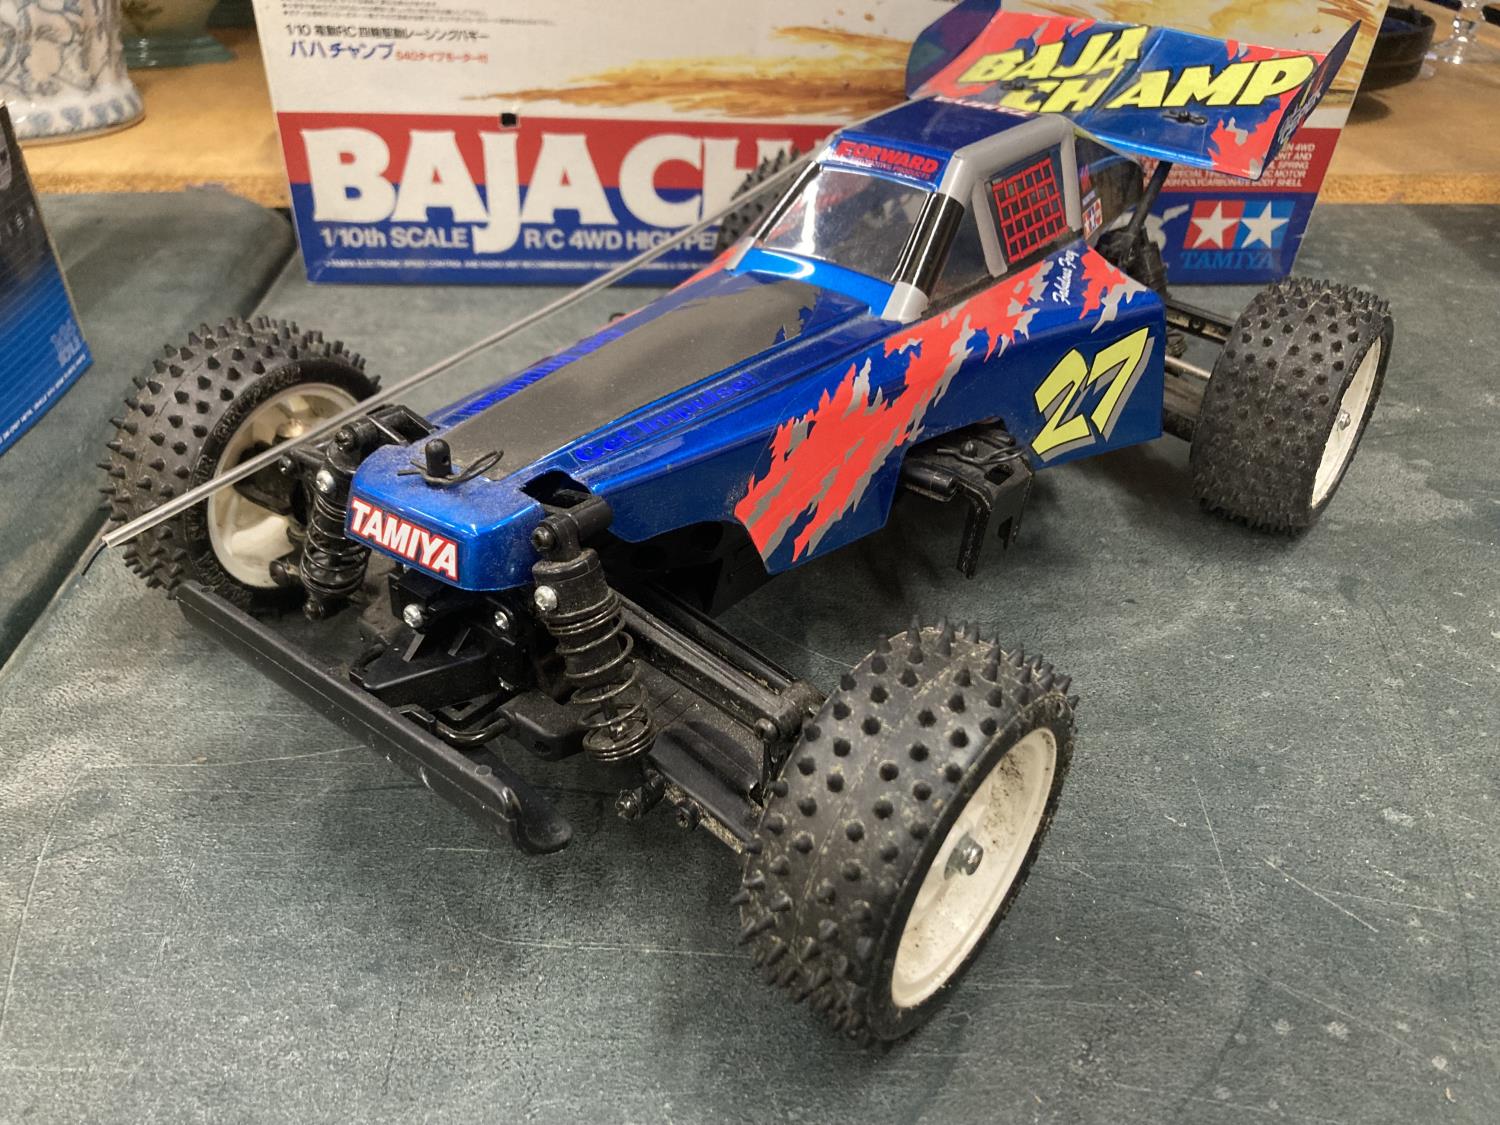 A TAMIYA BAJA CHAMP 1/10TH SCALE R/C 4WD HIGH PERFORMANCE OFF ROAD RACER (NO CONTROLLER PRESENT) - Image 5 of 8